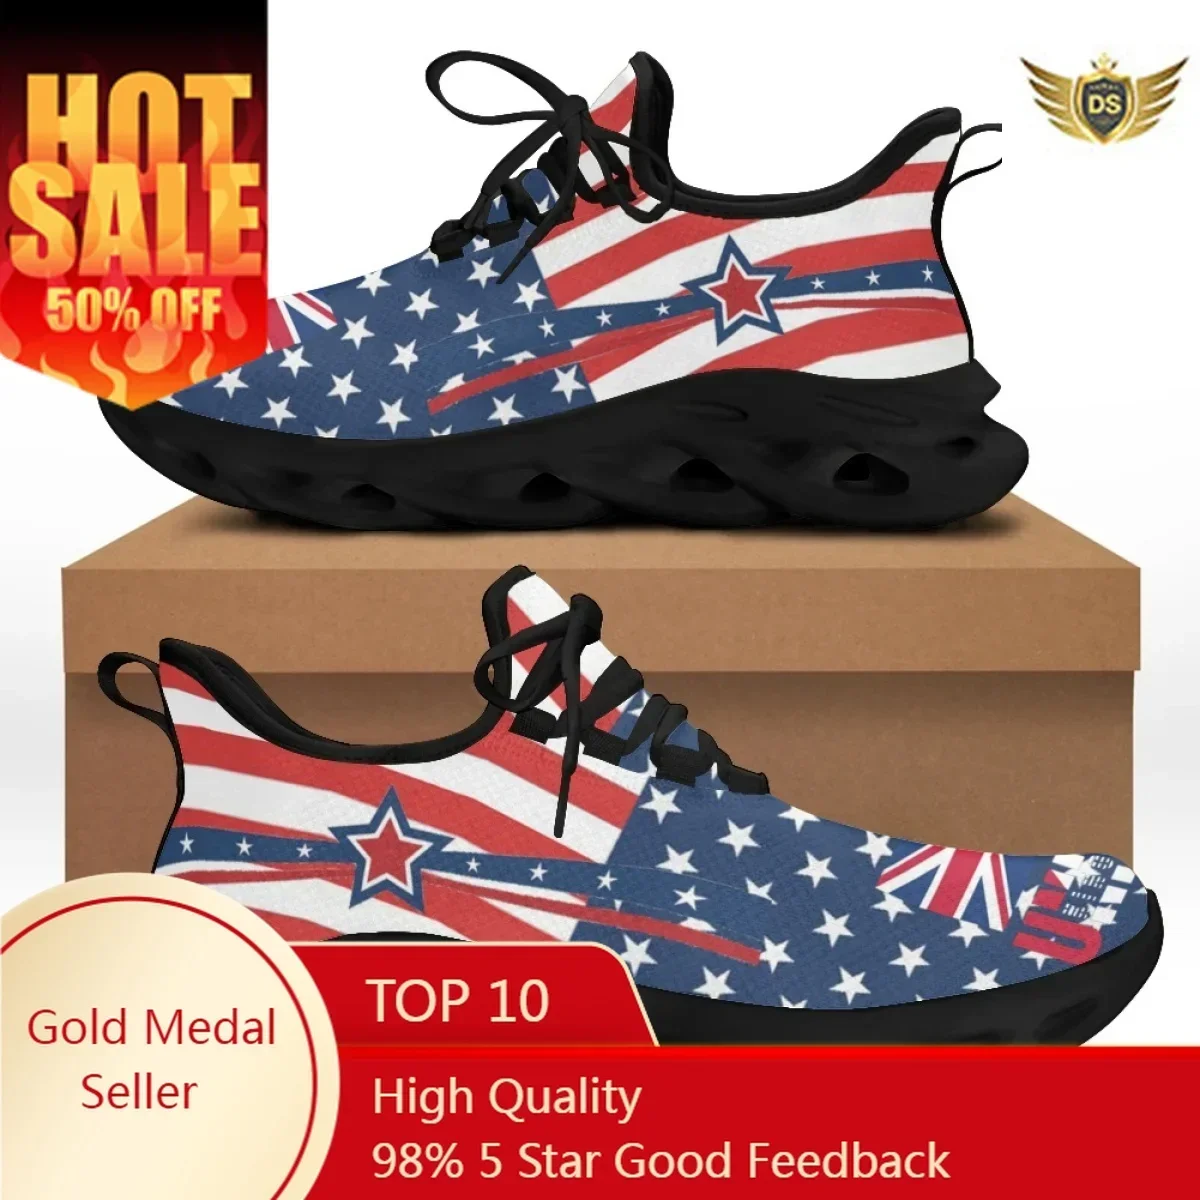 

Hot Style Lace-up Mesh Sneakers Shoes For Women Fashion England Flag Printed Ladies Flats Shoes Light Chunky Shoes